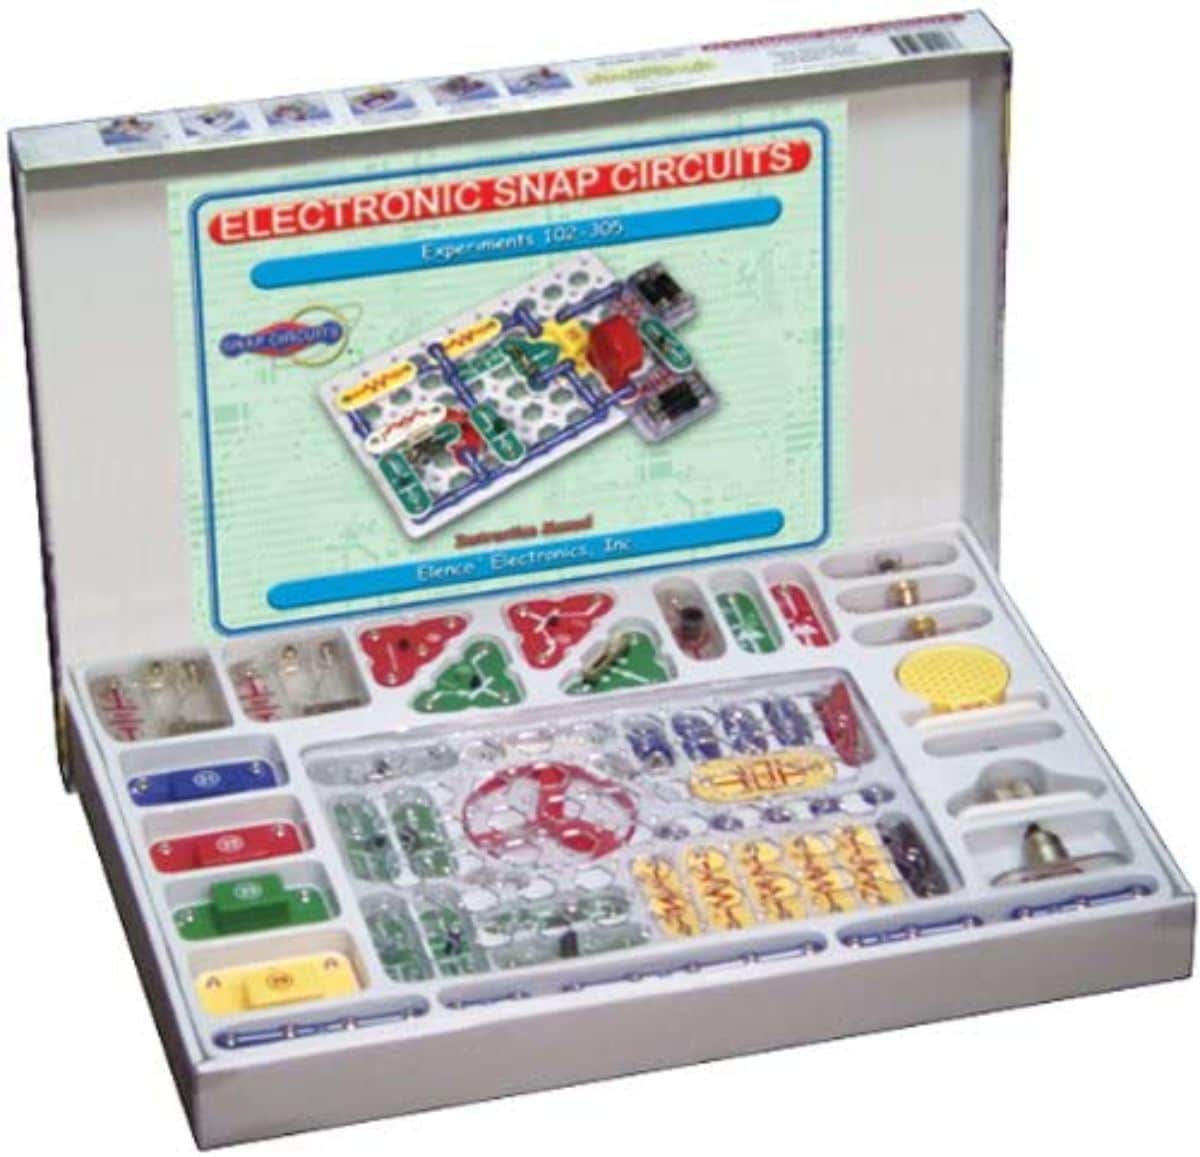 open snap circuits box on white background